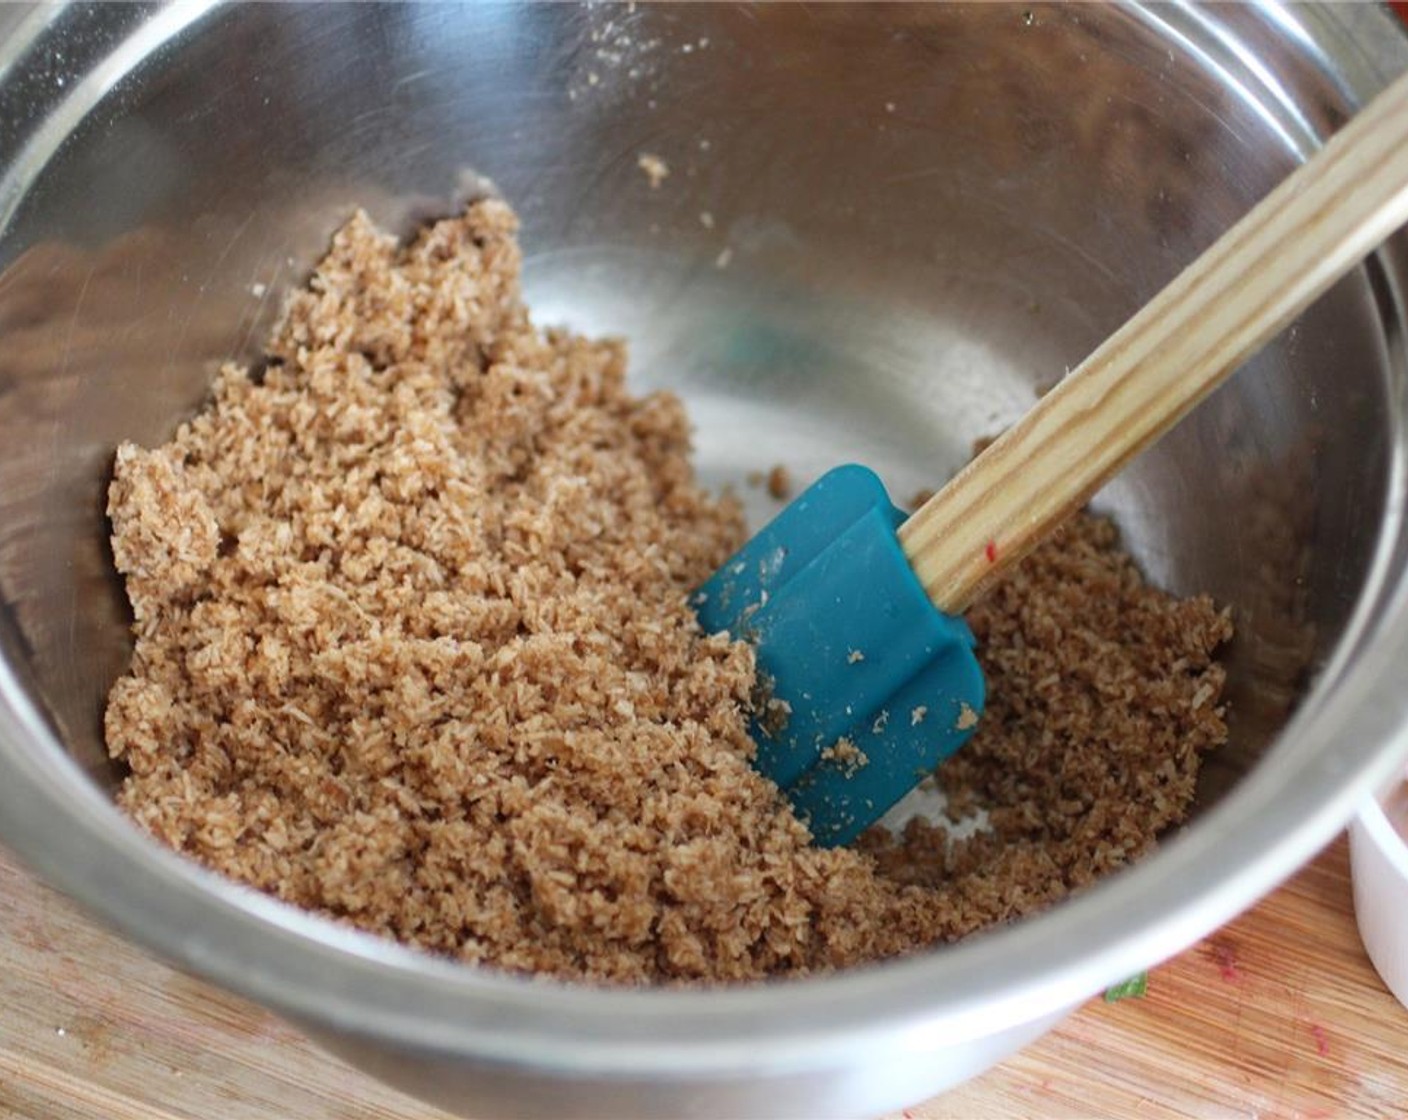 step 5 Combine the Unsweetened Shredded Coconut (1 1/2 cups), All-Purpose Flour (1/4 cup), Granulated Sugar (1/4 cup), Ground Cinnamon (1/2 Tbsp), Vanilla Extract (1 tsp), and Agave Syrup (2 Tbsp). You'll have a crumbly topping.